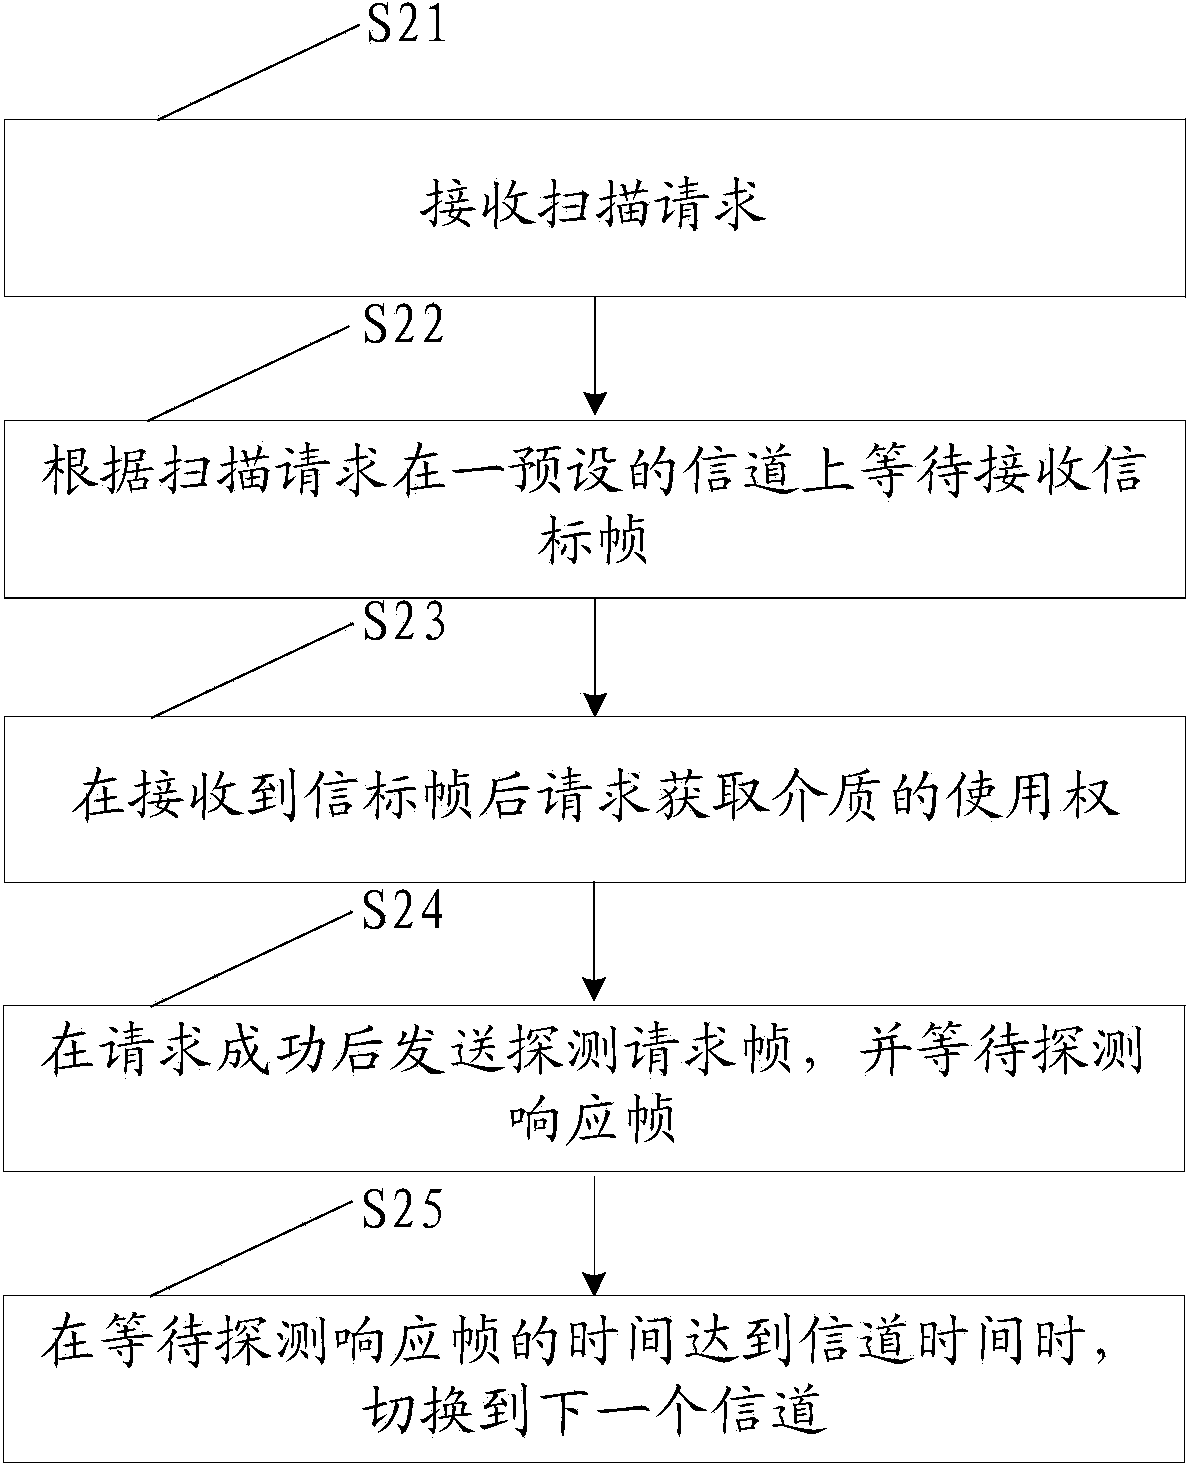 Wifi chip and control method during coexistence of station (STA) mode and access point (AP) mode